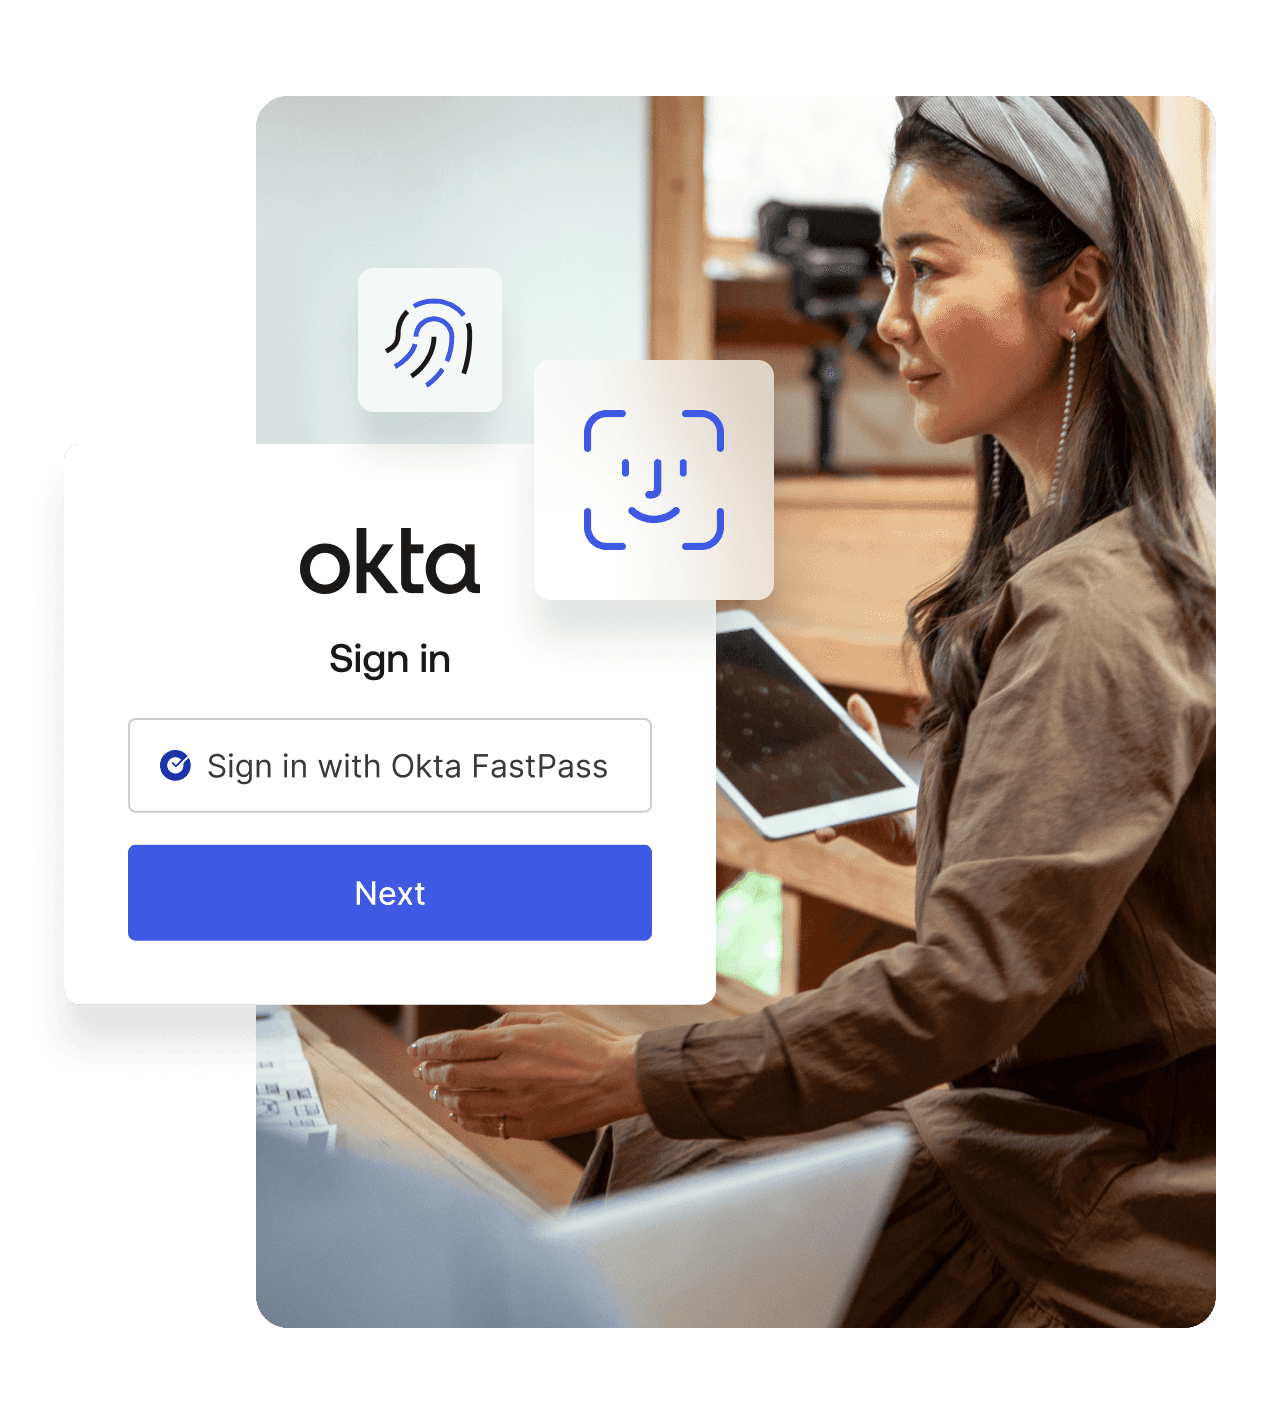 A graphic of an Okta FastPass sign-in pop-up window layered over an image of a woman holding a tablet.